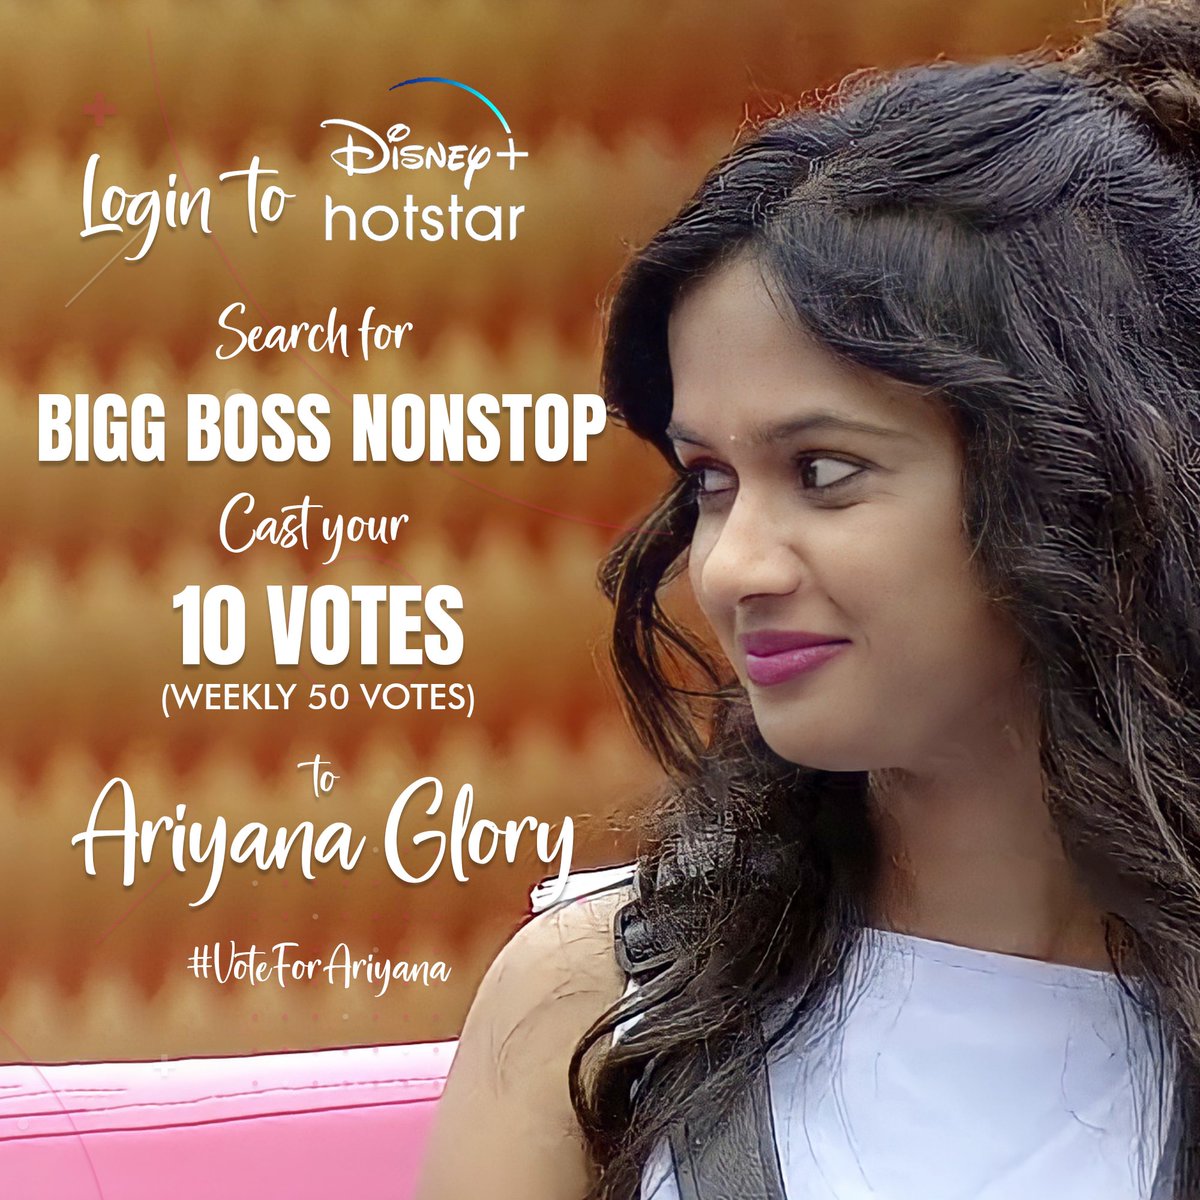 Let's vote and support our #daredevil Ariyana! Login to Disney + Hotstar APP Search for BIGG BOSS NON STOP CAST YOUR VOTE FOR ARIYANA (10 Votes) No subscription required! #ariyanaglory #anchorariyana #biggbossott #biggbossnonstop #biggbossofficial